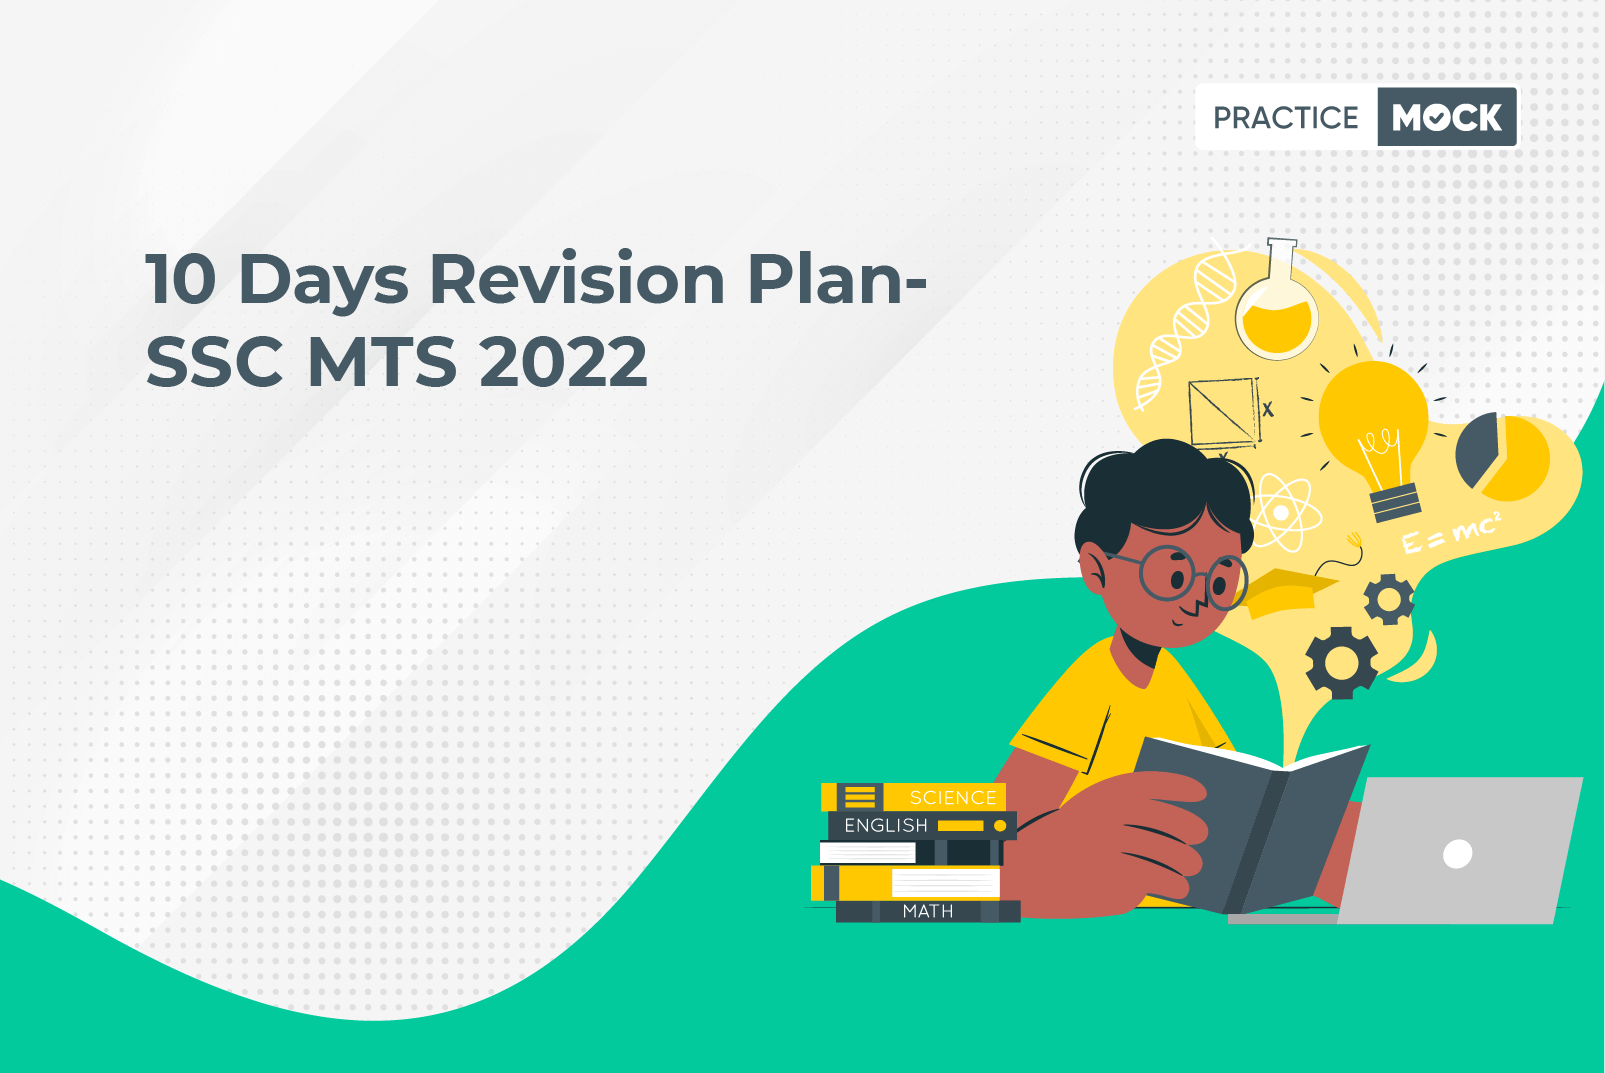 SSC MTS10 Days Revision Plan